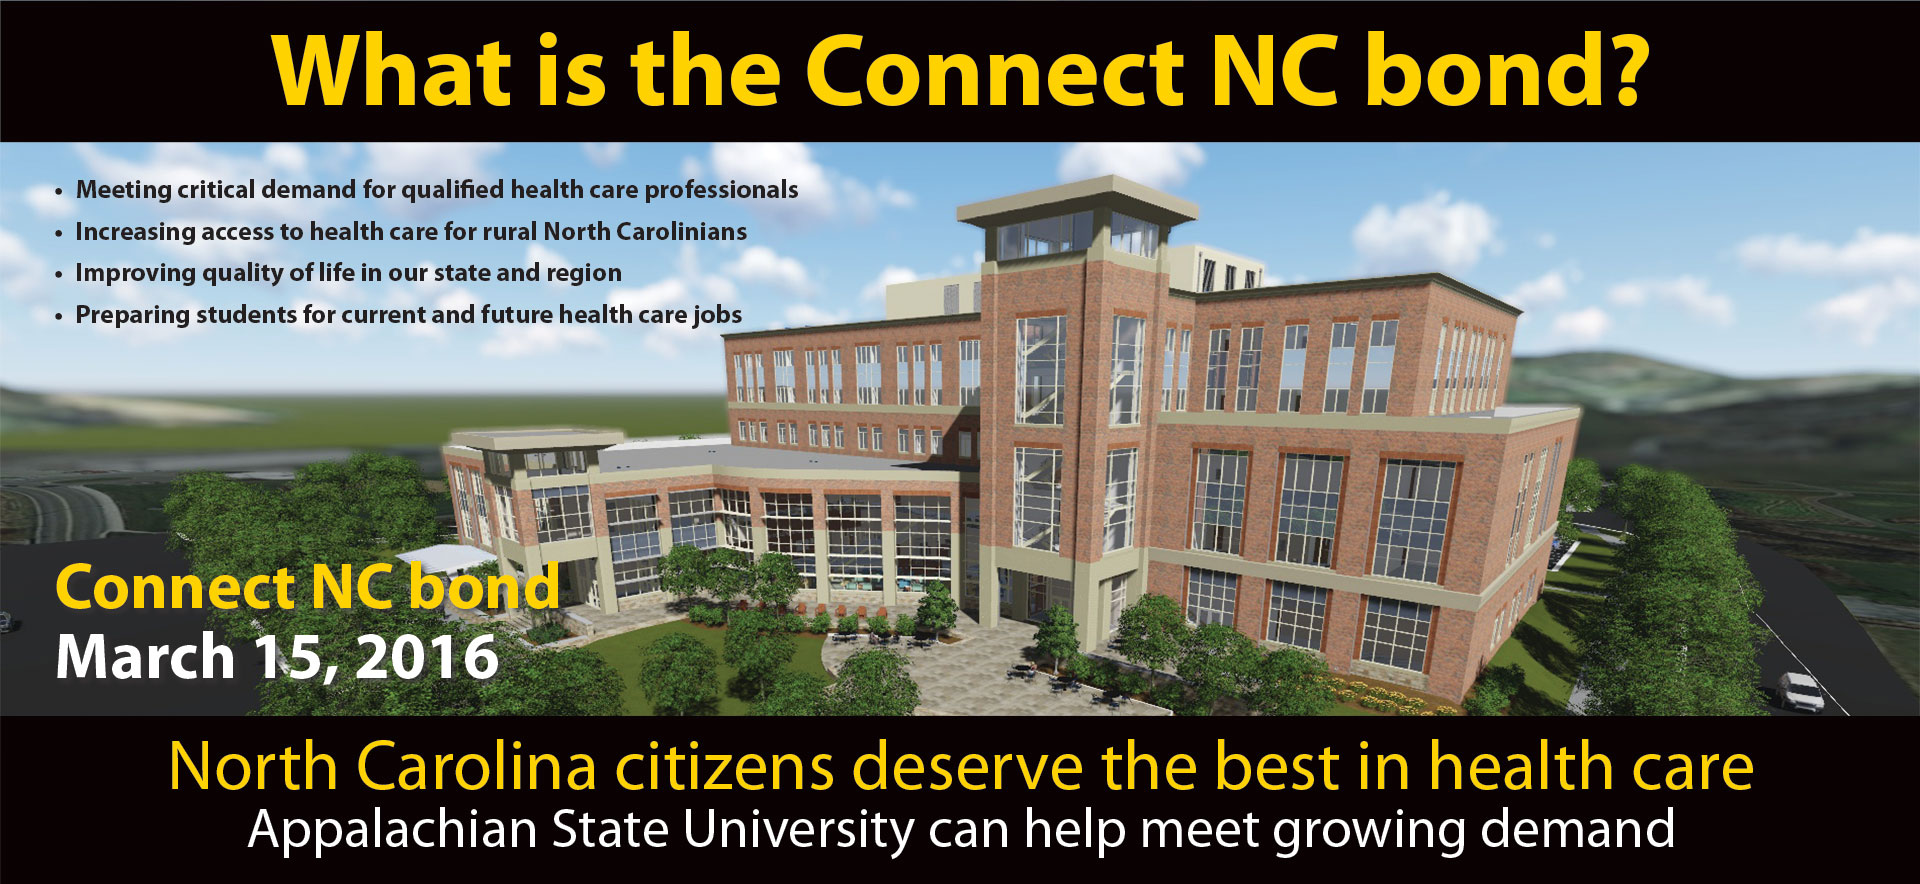 What is the Connect NC bond? Meeting critical demand for qualified health care professionals. Applalachian State University can help meet growing demand.